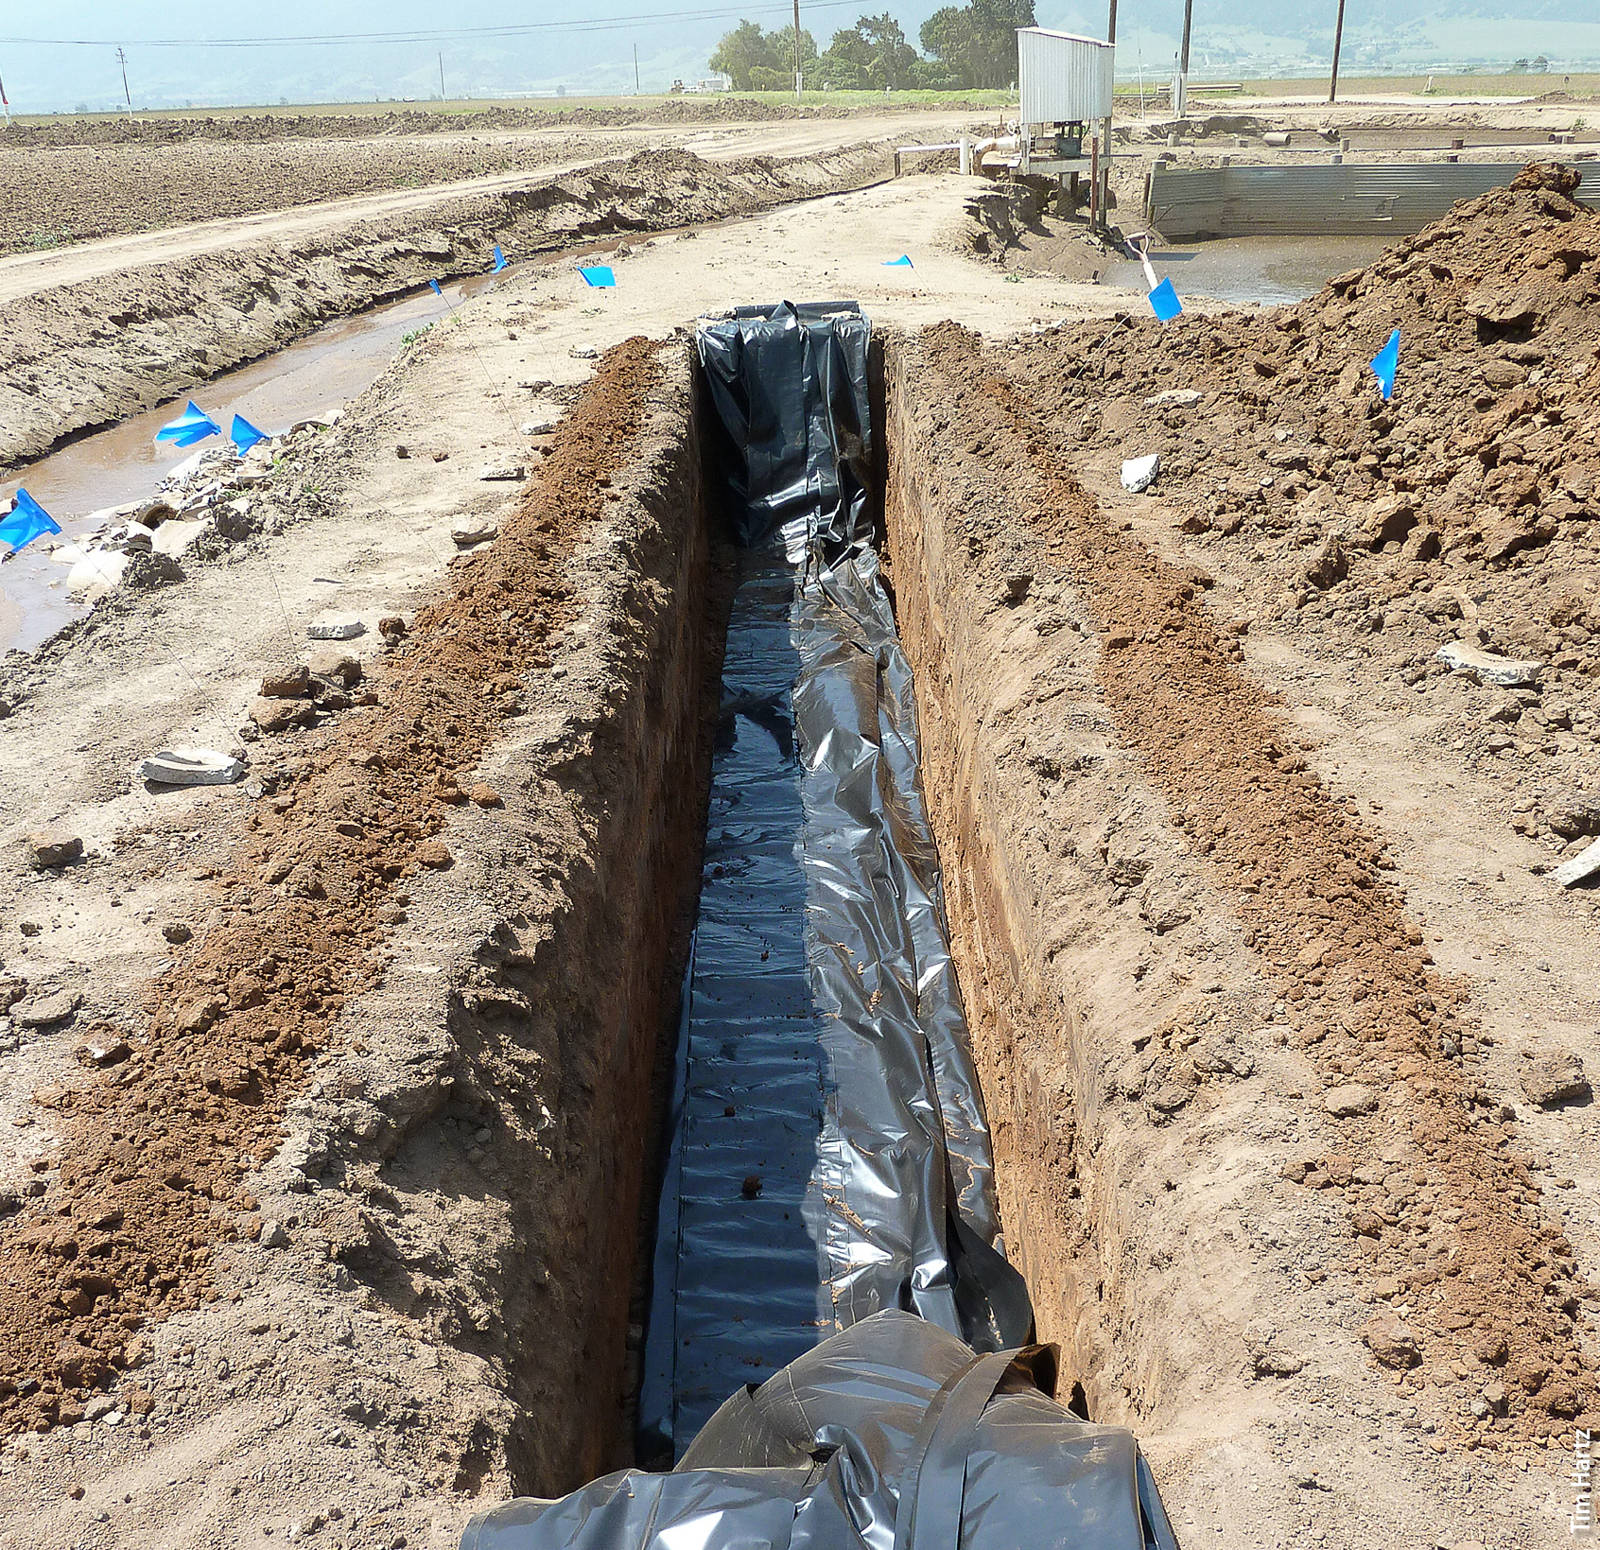 The denitrification bioreactor was dug with a backhoe and fitted with a polyethylene liner.